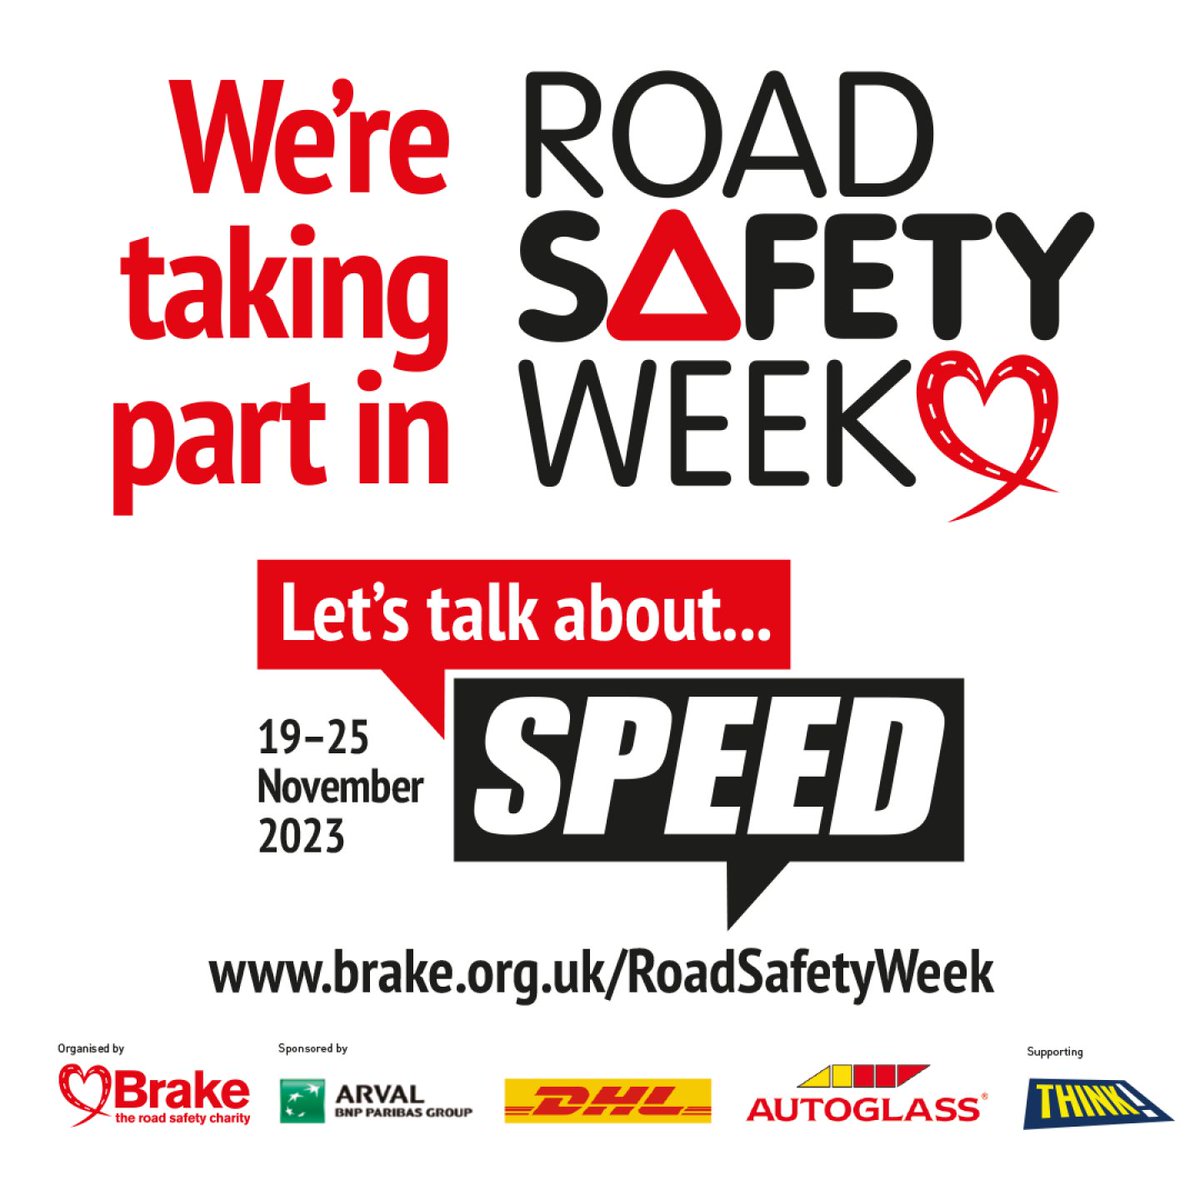 It's #RoadSafetyWeek! On average, five people die on UK roads every day, and the latest figures show speeding is up 20%. Whoever you are and however you travel, we need to talk about SPEED. #SSRP | #SaferRoads | #RoadSafety | #Sussex | #NoNeedForSpeed